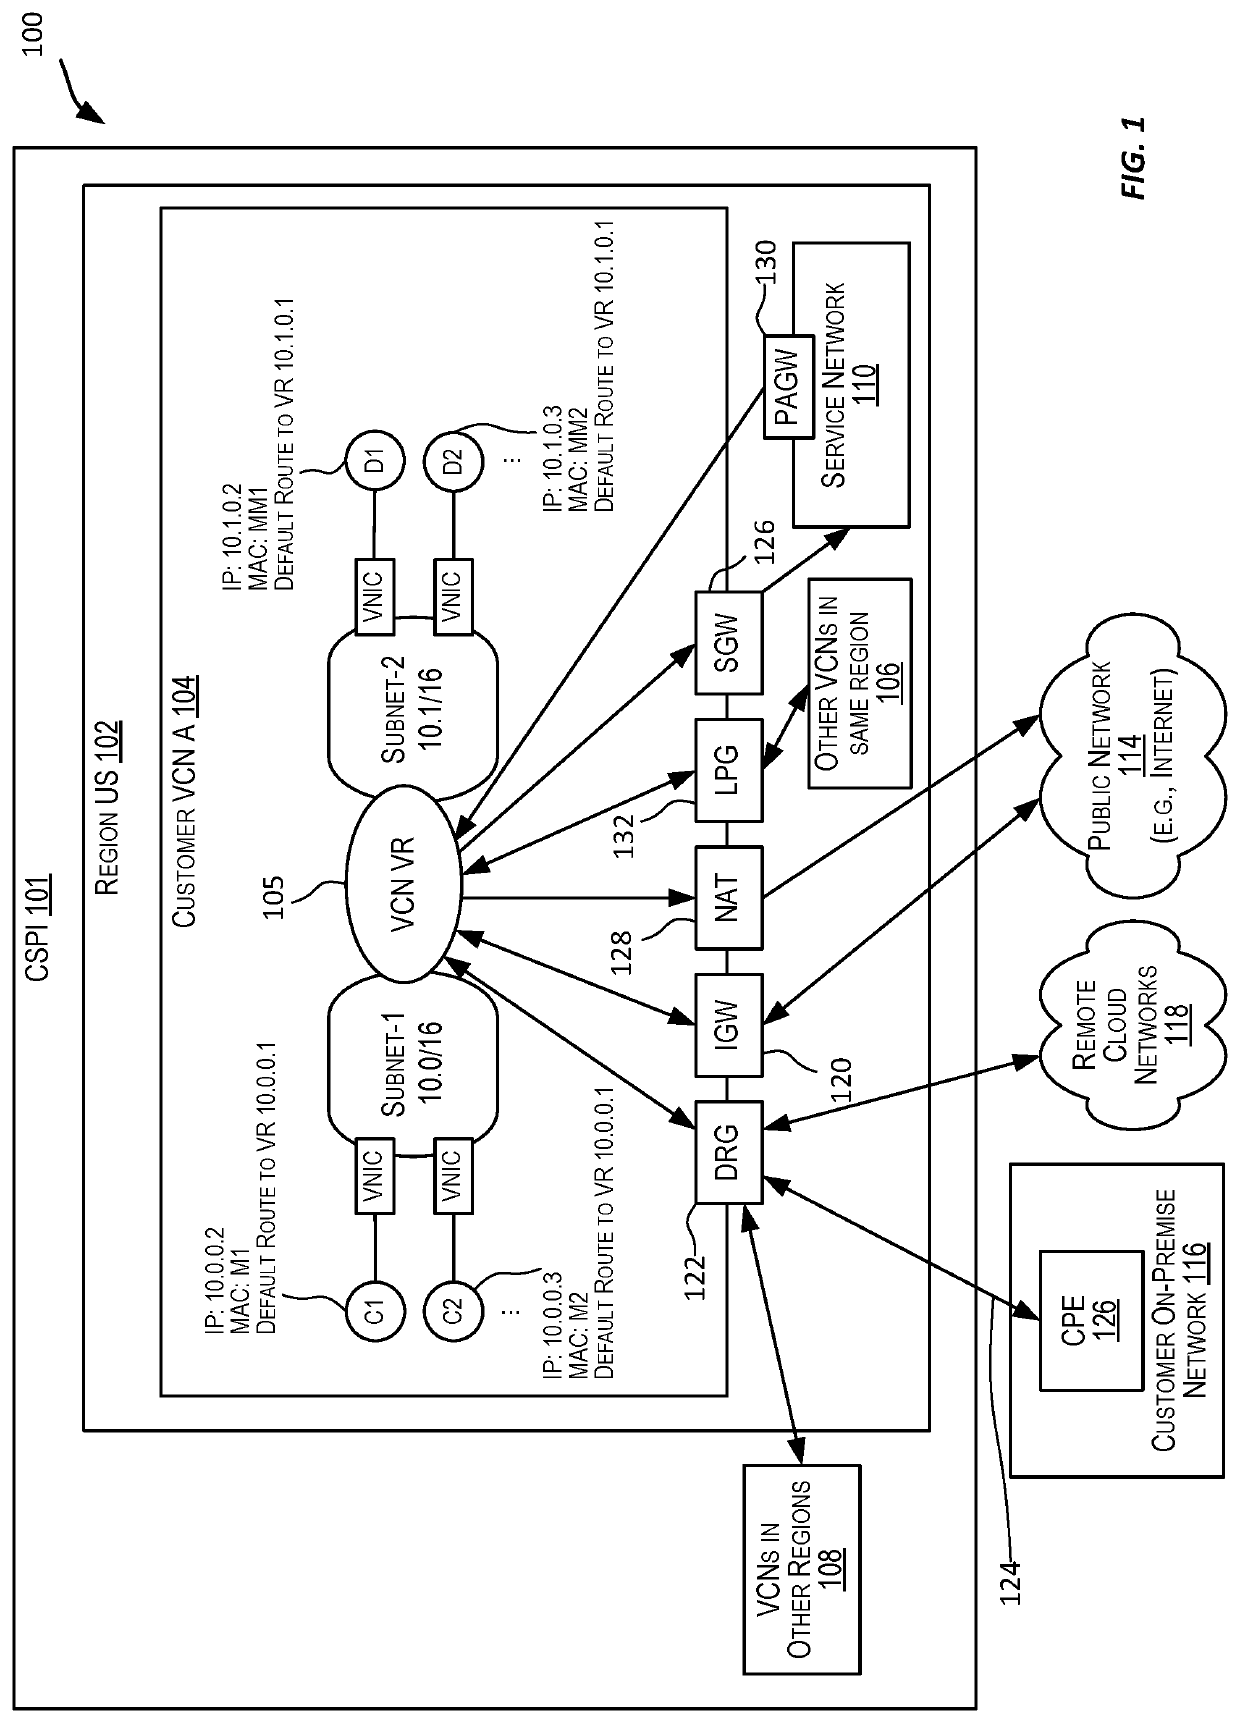 CLOUD SCALE MULTI-TENANCY FOR RDMA OVER CONVERGED ETHERNET (RoCE)